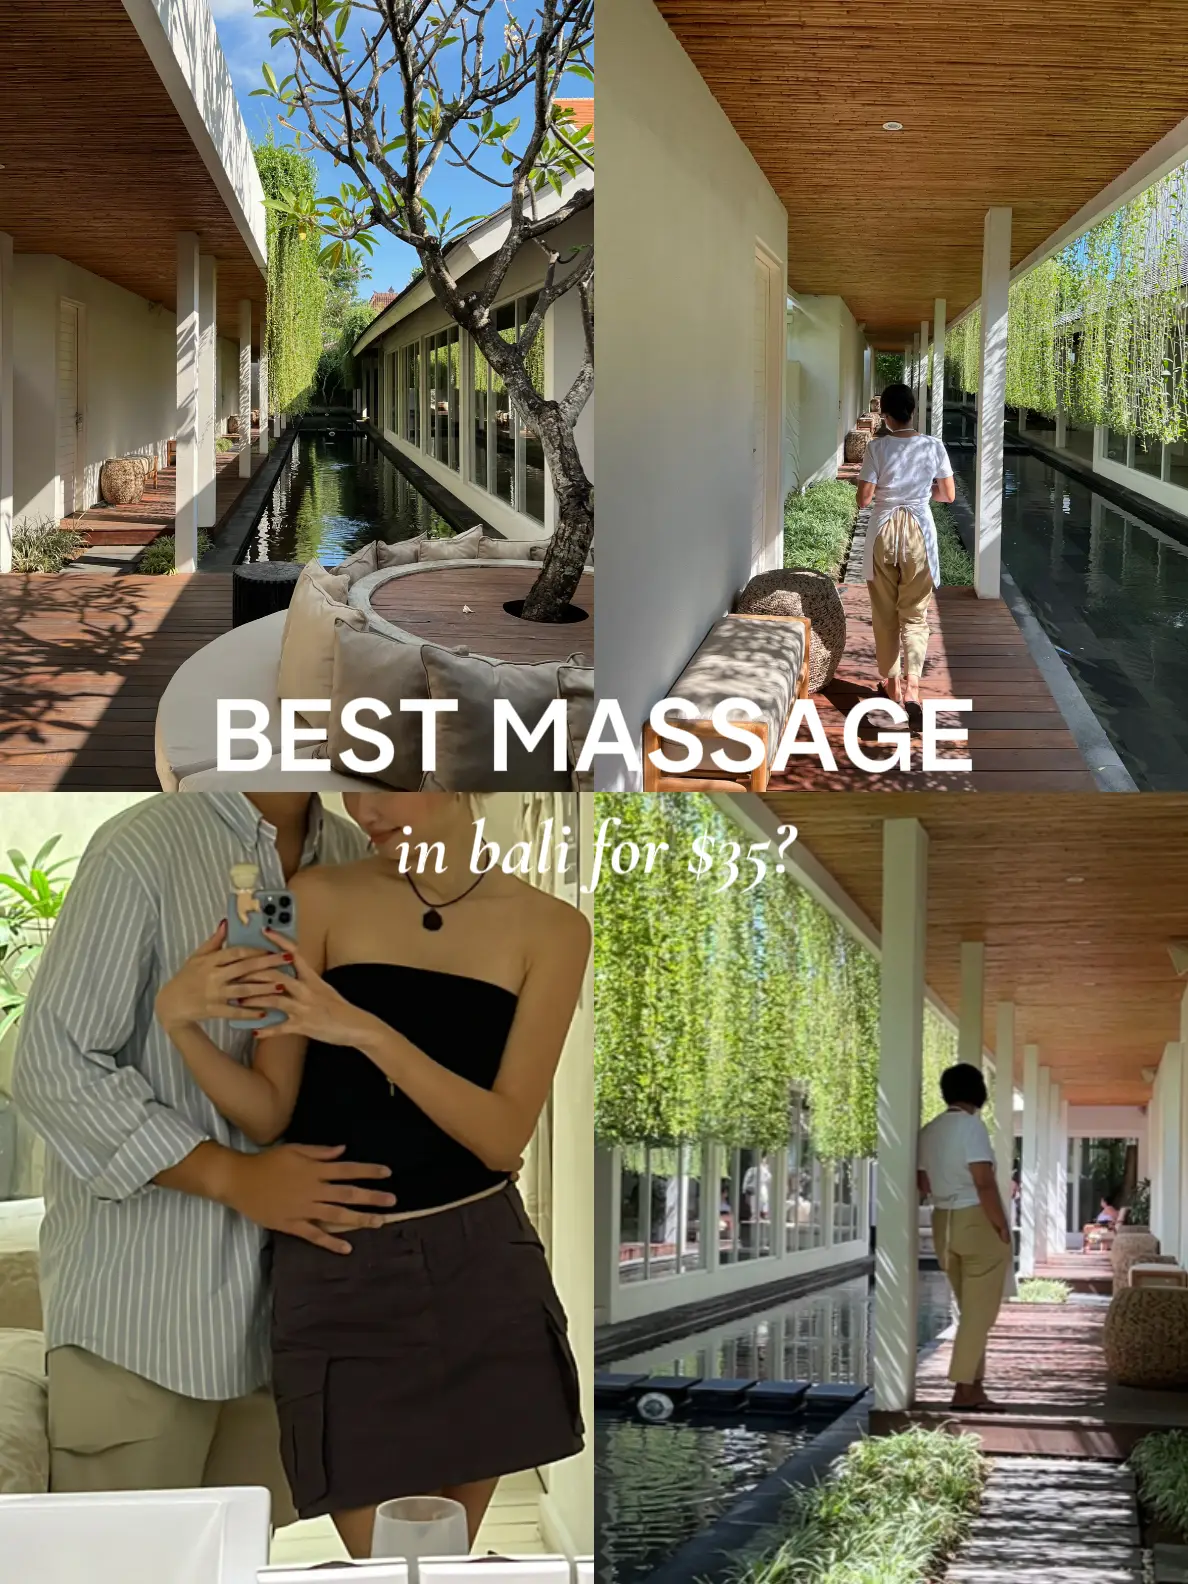 I paid $35 for the best massage in Bali ✨'s images(0)